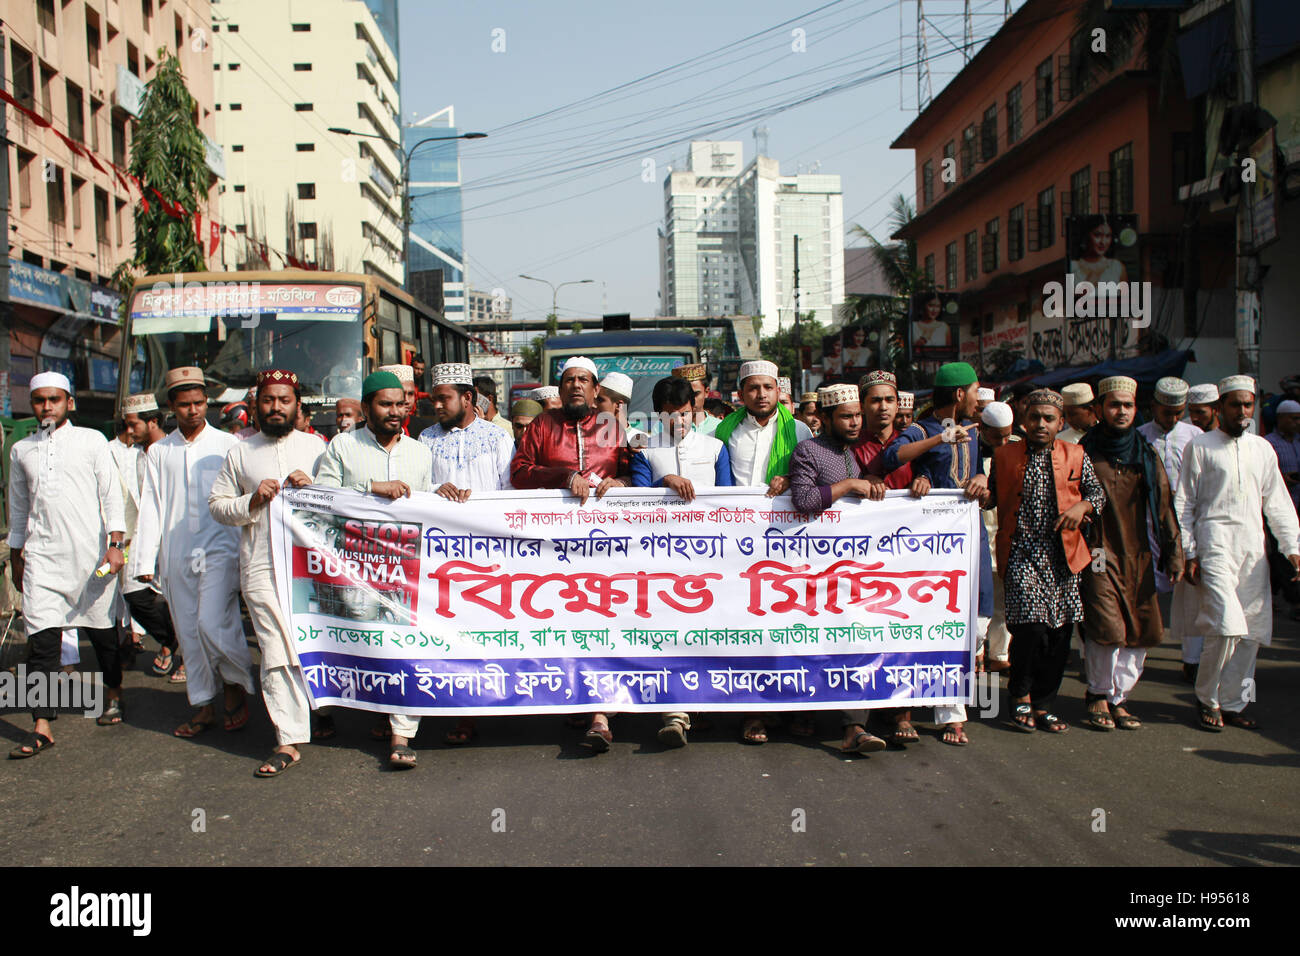 Dhaka, Bangladesh. 18th Nov, 2016. Several Bangladeshi Islamic party organize a demonstration in front of Baitul Mukkaram National mosque against the recent attack on Muslim Rohingya community at Mayanmar. November 18, 2016. According to Human Rights Watch - hundreds of homes have been destroyed in multiple villages amid an ongoing crackdown by the Burmese military. Authorities of Bangladesh said dozens of people have attempted to flee across the border in recent days. A total of 130 people have been killed in the latest surge of violence in the country, according to the Myanmar army. (C Stock Photo